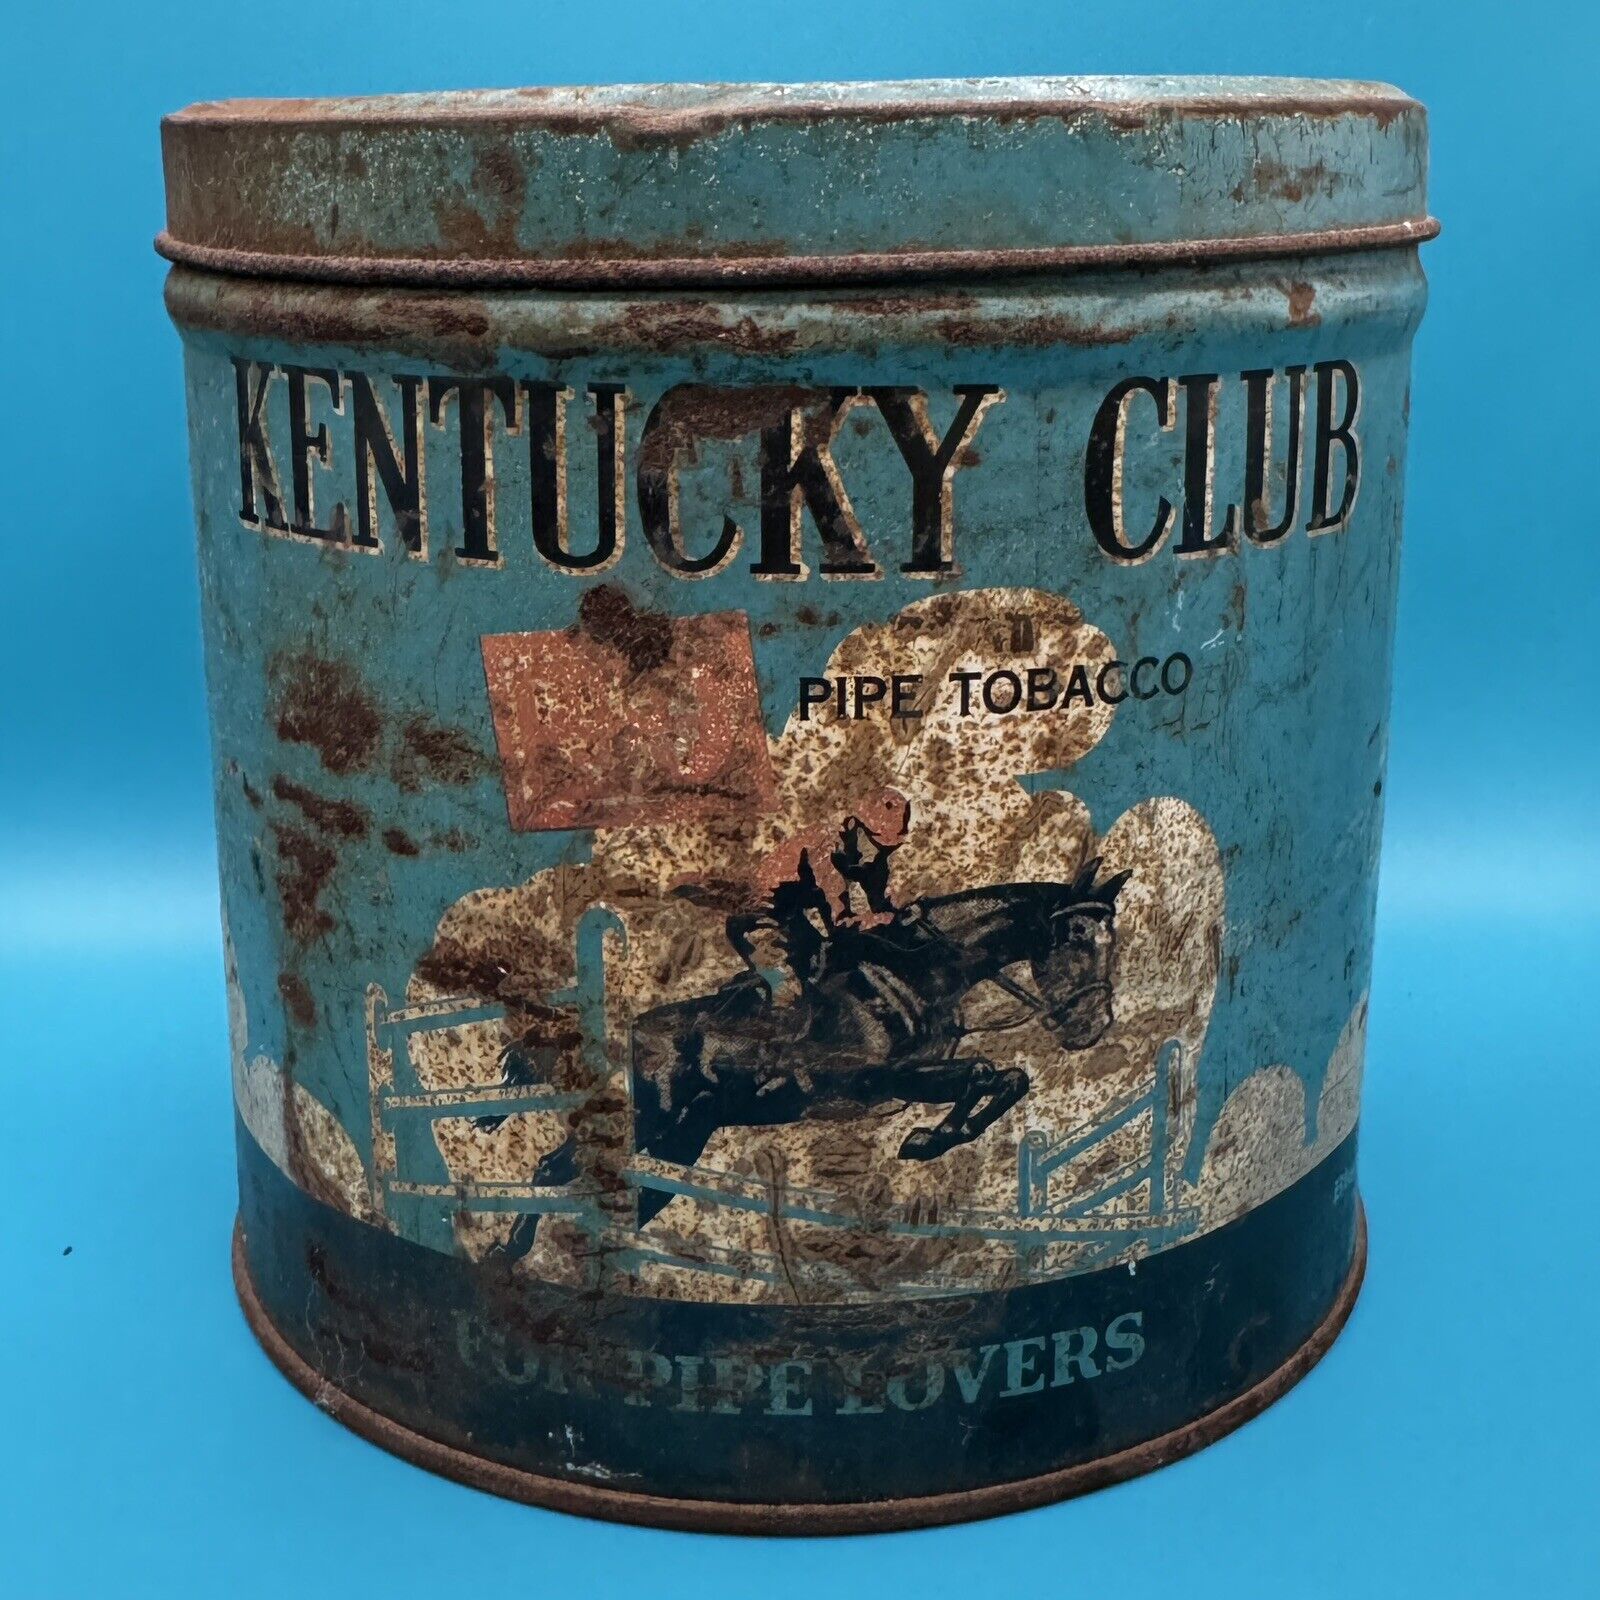 Vintage Kentucky Club Tobacco Tin Empty Fine Cut For Pipe Lovers